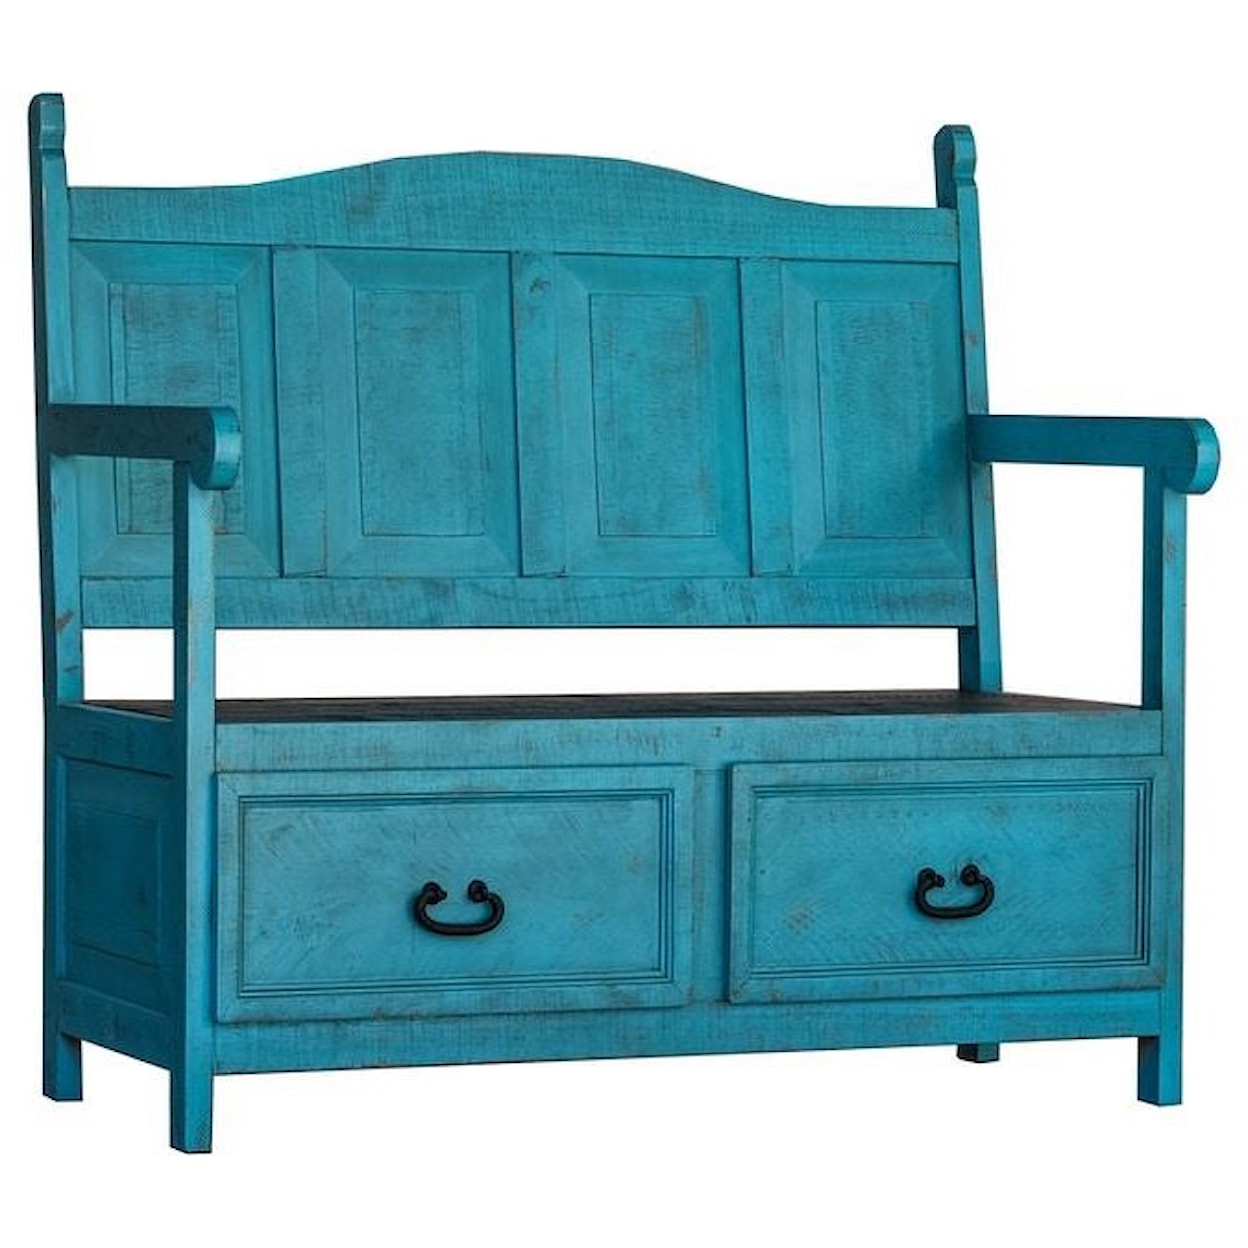 Elements International Accents Bench